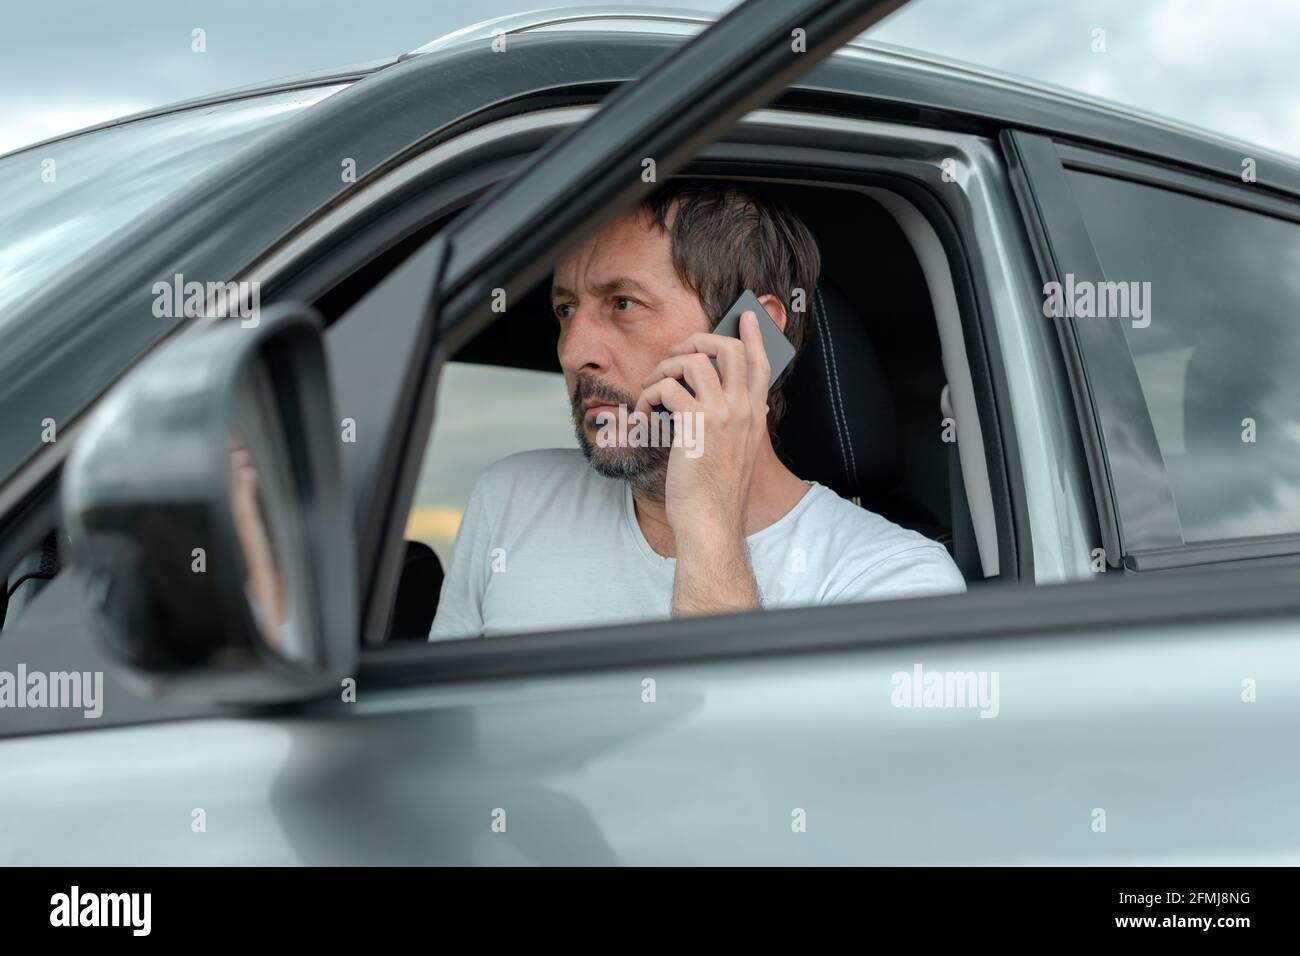 Adult man sitting in car and talking on mobile phone, looking serious and worried, selective focus Stock Photo